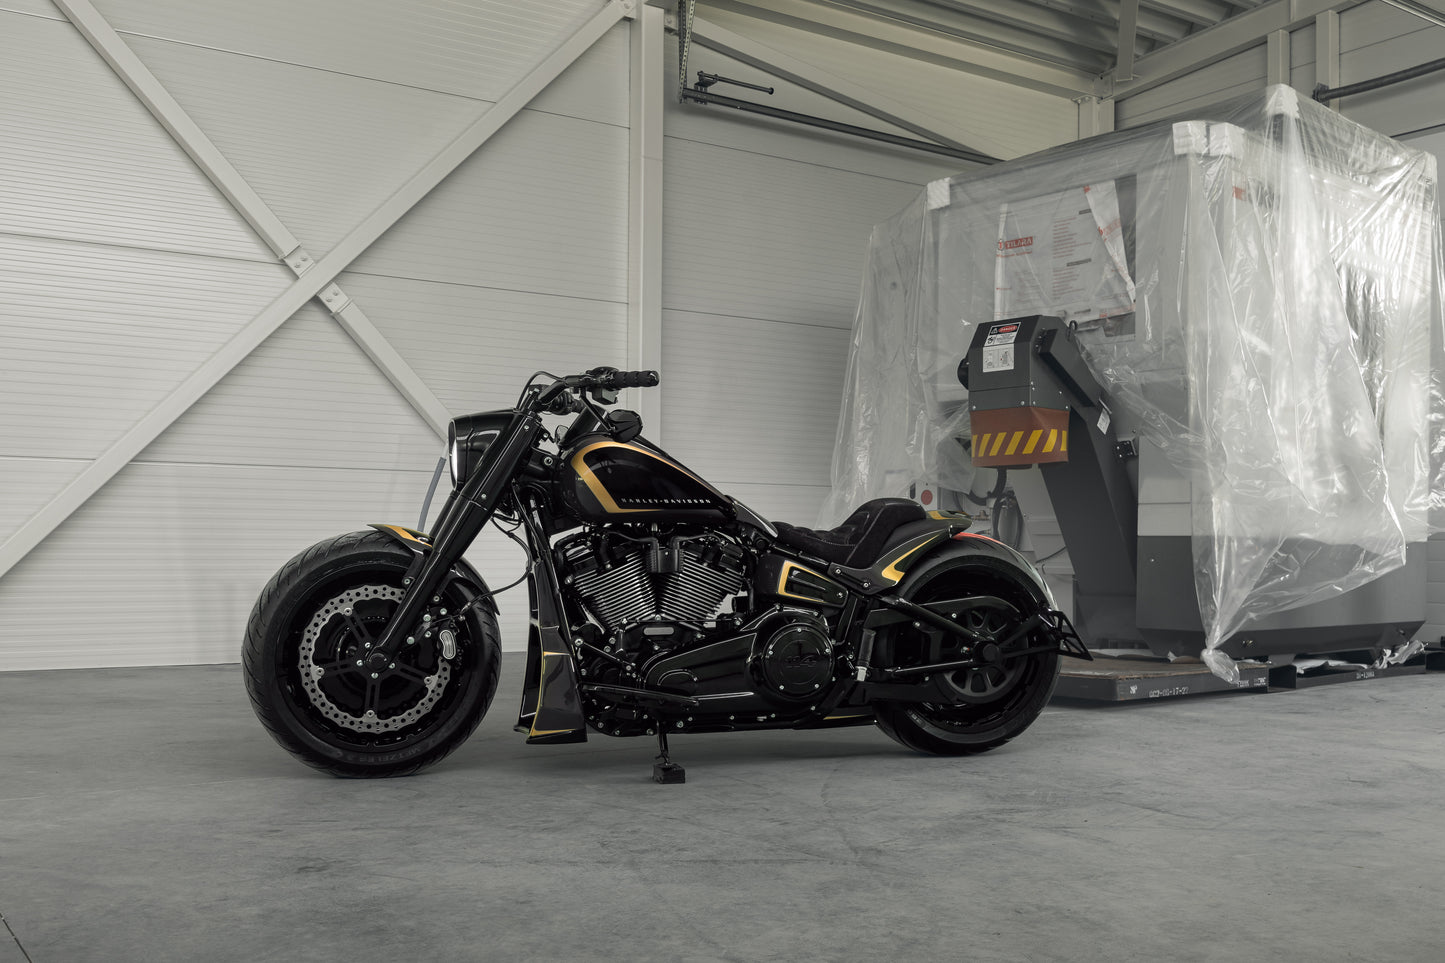 Harley Davidson motorcycle with Killer Custom parts from the side in a white spacious garage